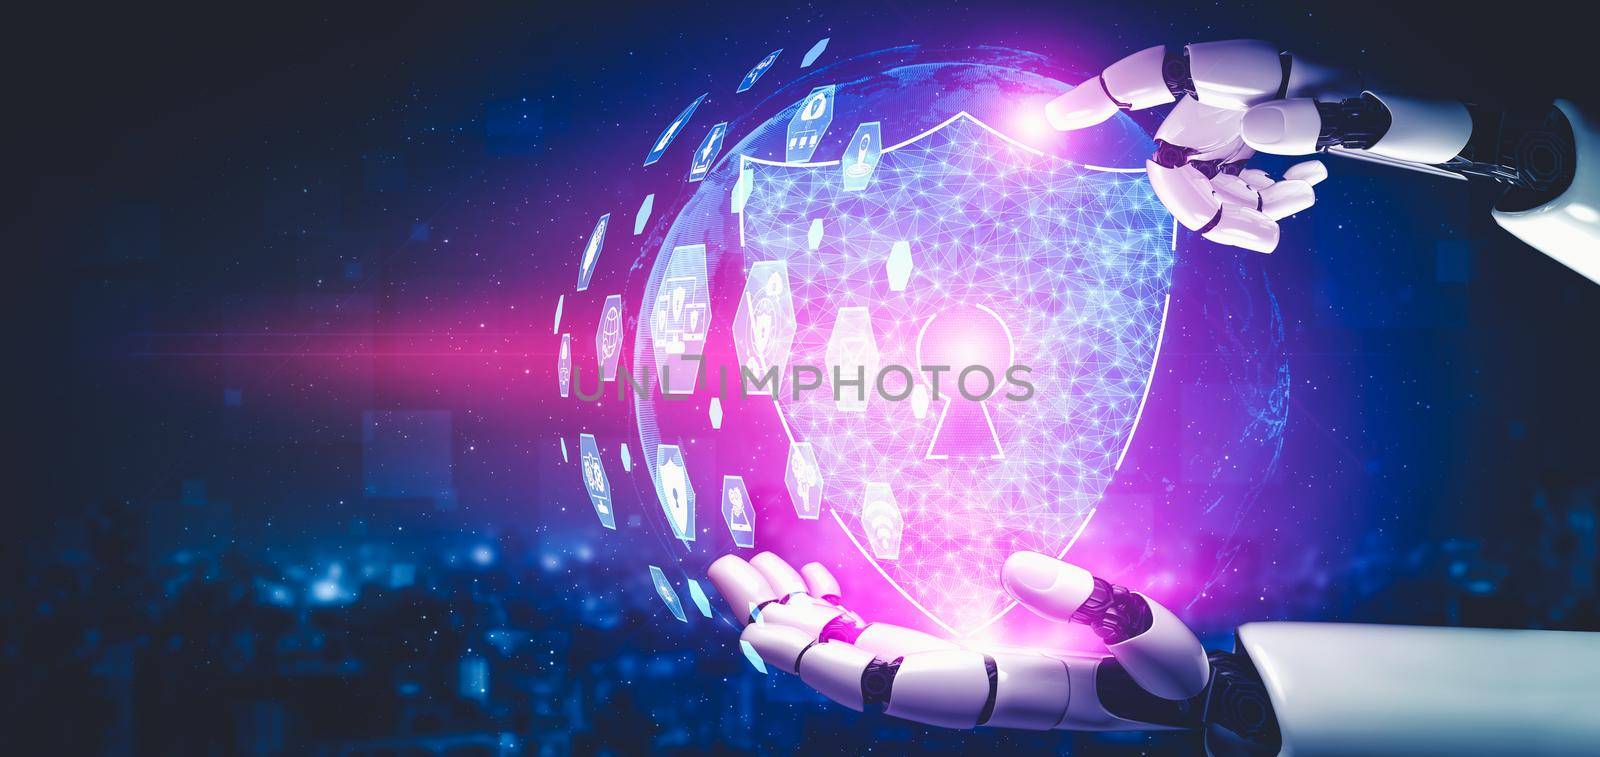 3D rendering artificial intelligence AI research of droid robot and cyborg development for future of people living. Digital data mining and machine learning technology design for computer brain.